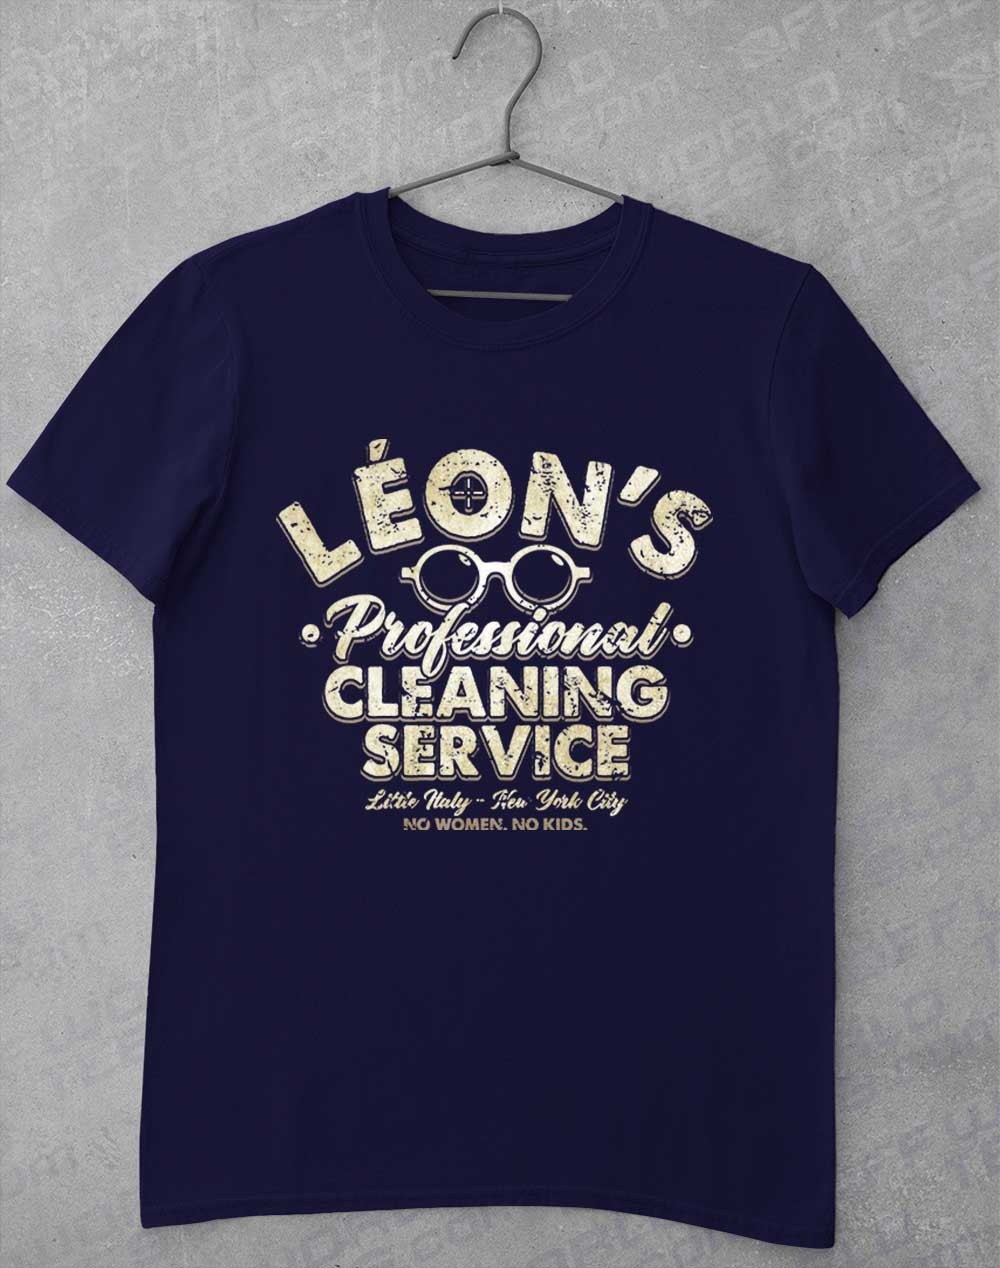 Navy - Leon's Professional Cleaning T-Shirt